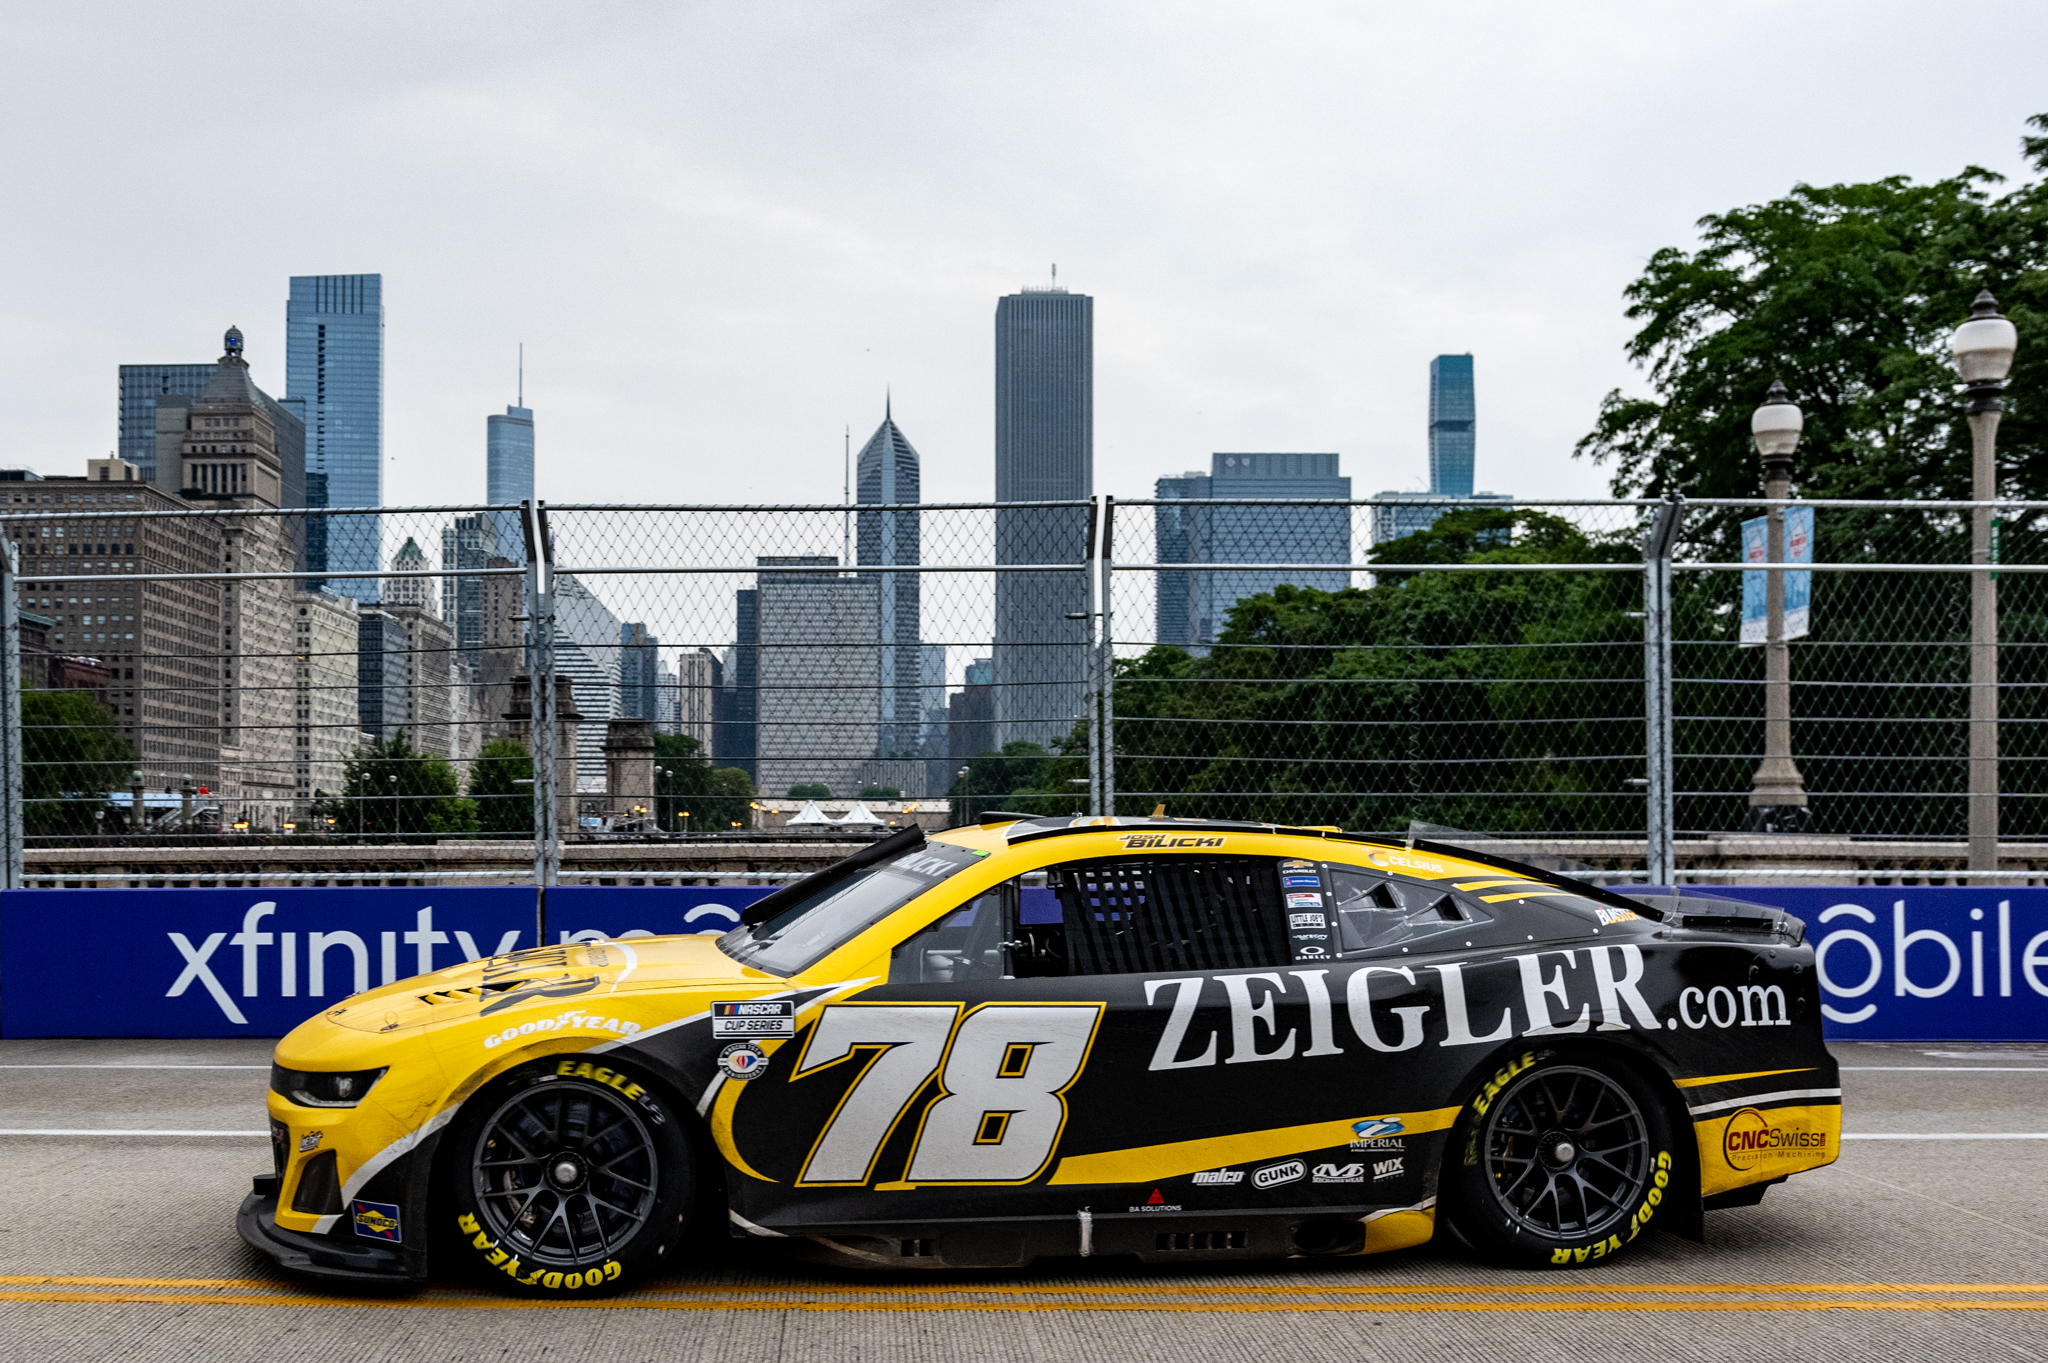 Zeigler’s No. 78 Finishes in P23 After A Spirited Drive Through NASCAR’s Chicago Street Race